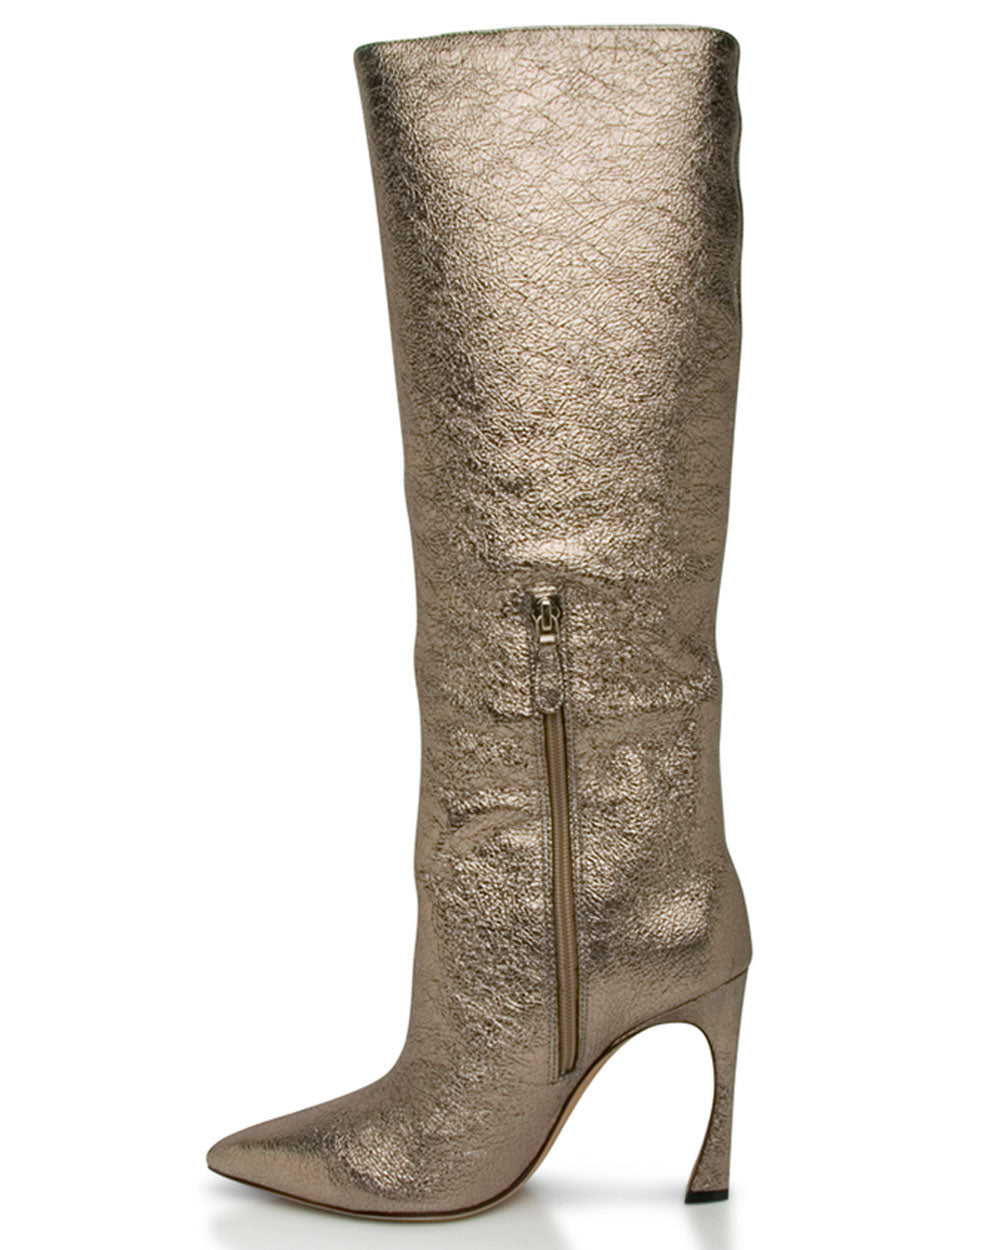 Kyra Tall Boot in Gold